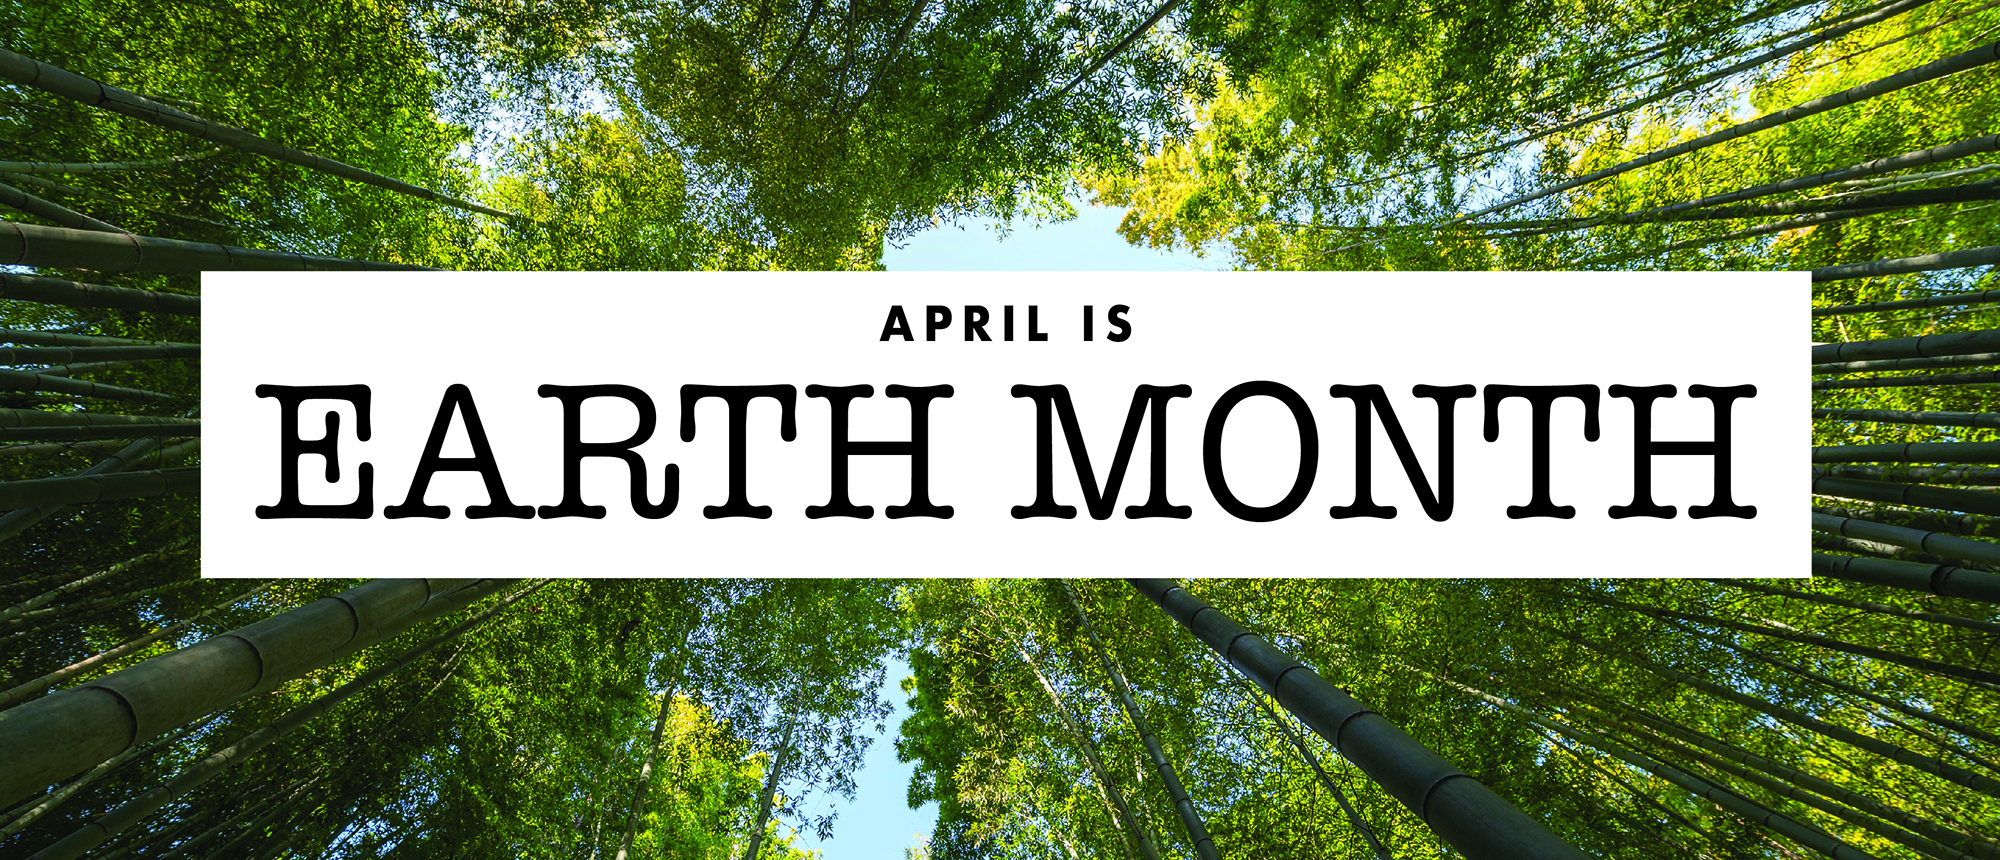 Earth Month Web Banner